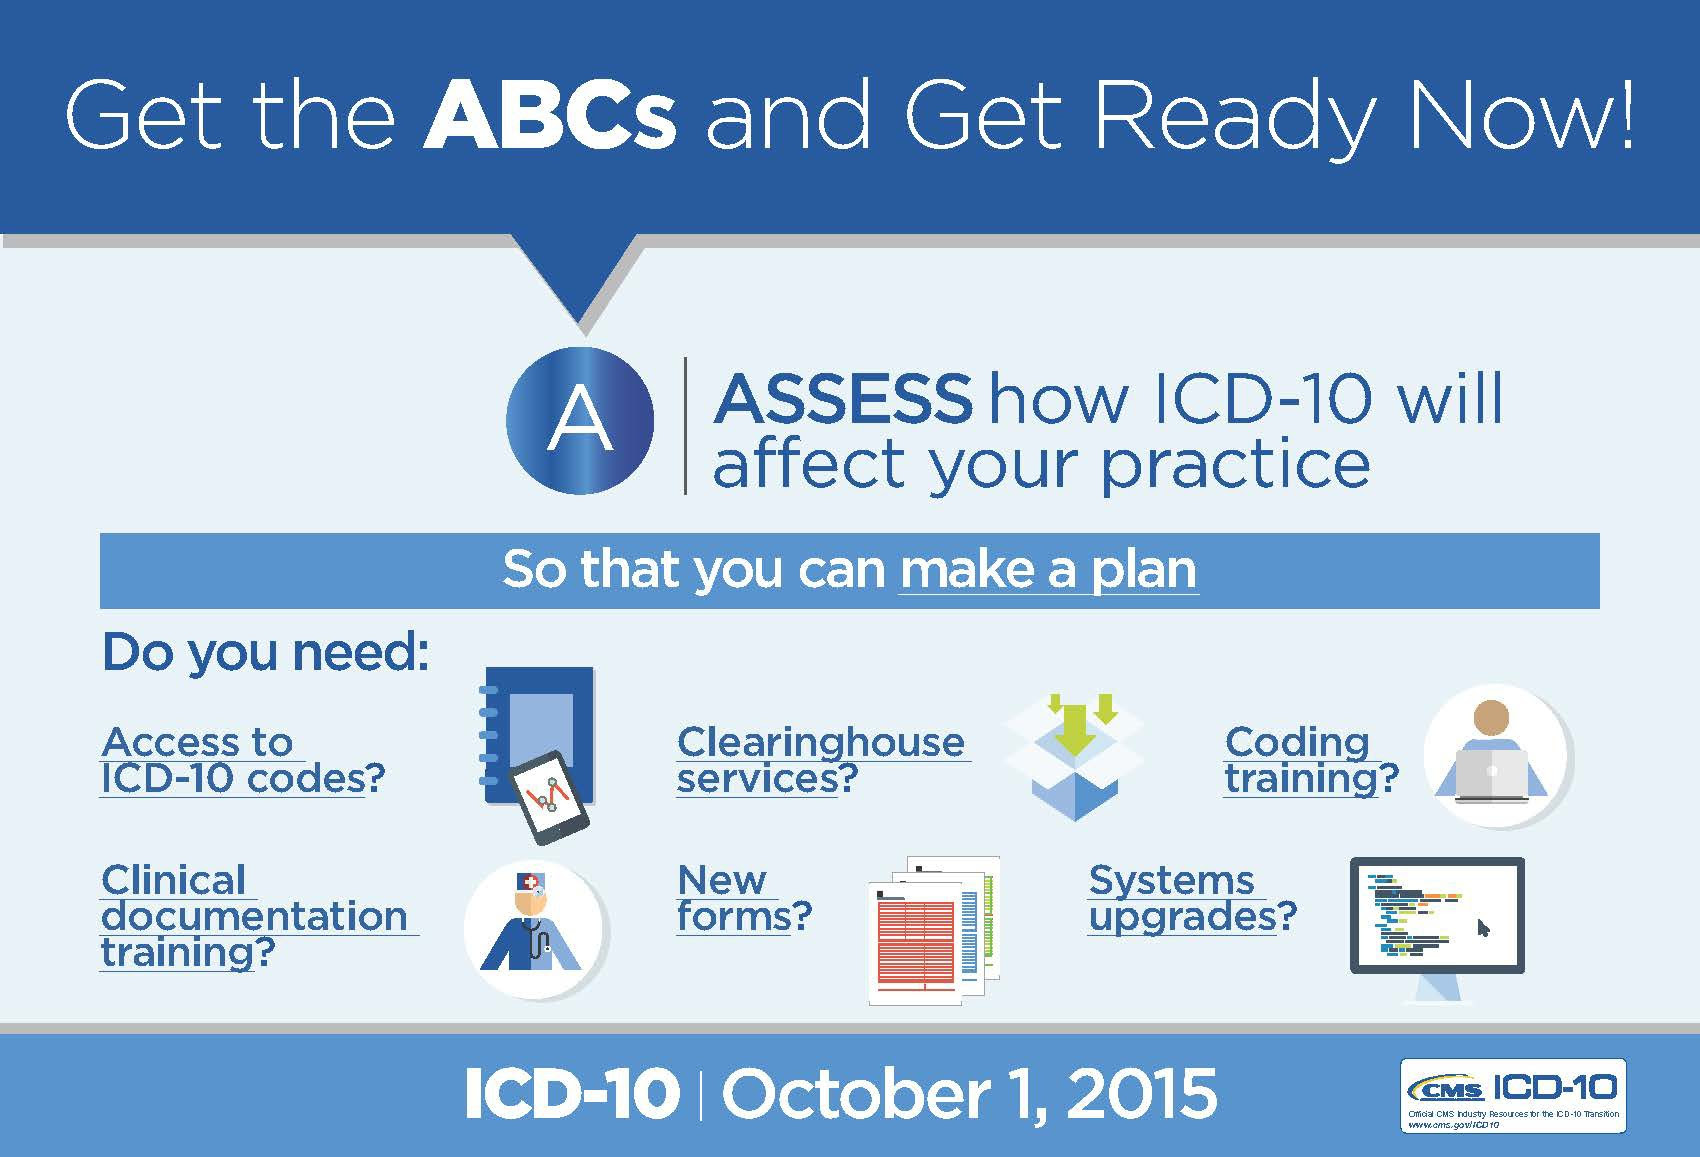 ICD-10 GET THE ABCs